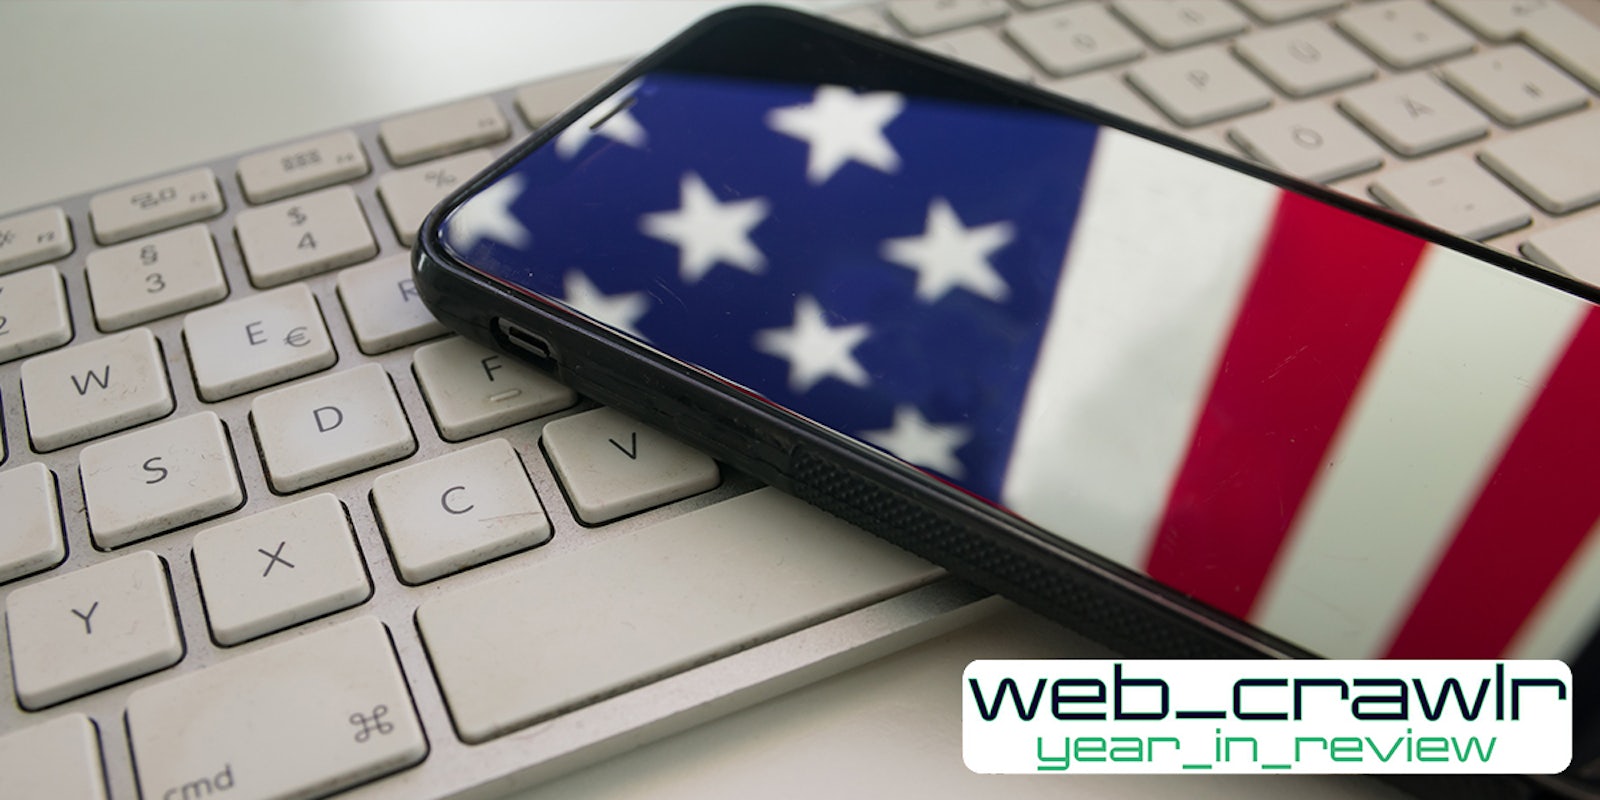 phone with American Flag reflection on white keyboard with web_crawlr year_in_review logo at bottom right corner